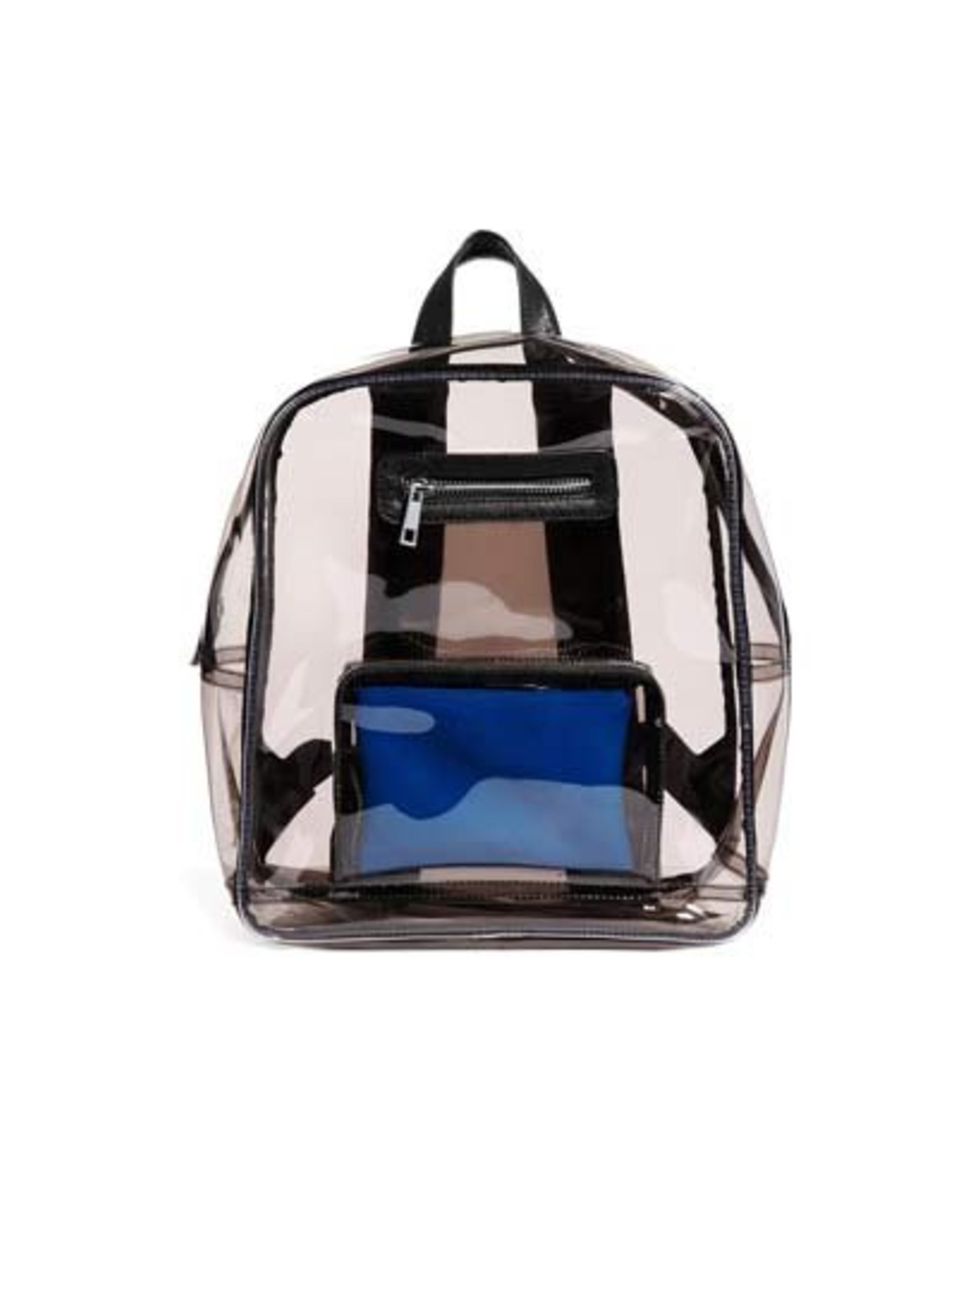 <p><a href="http://www.asos.com/ASOS/ASOS-Clear-Backpack-With-Internal-Coin-Purse/Prod/pgeproduct.aspx?iid=3701378&amp;SearchQuery=clear%20plastic%20backpack&amp;sh=0&amp;pge=0&amp;pgesize=36&amp;sort=-1&amp;clr=Black">Asos</a> backpack, £38</p>